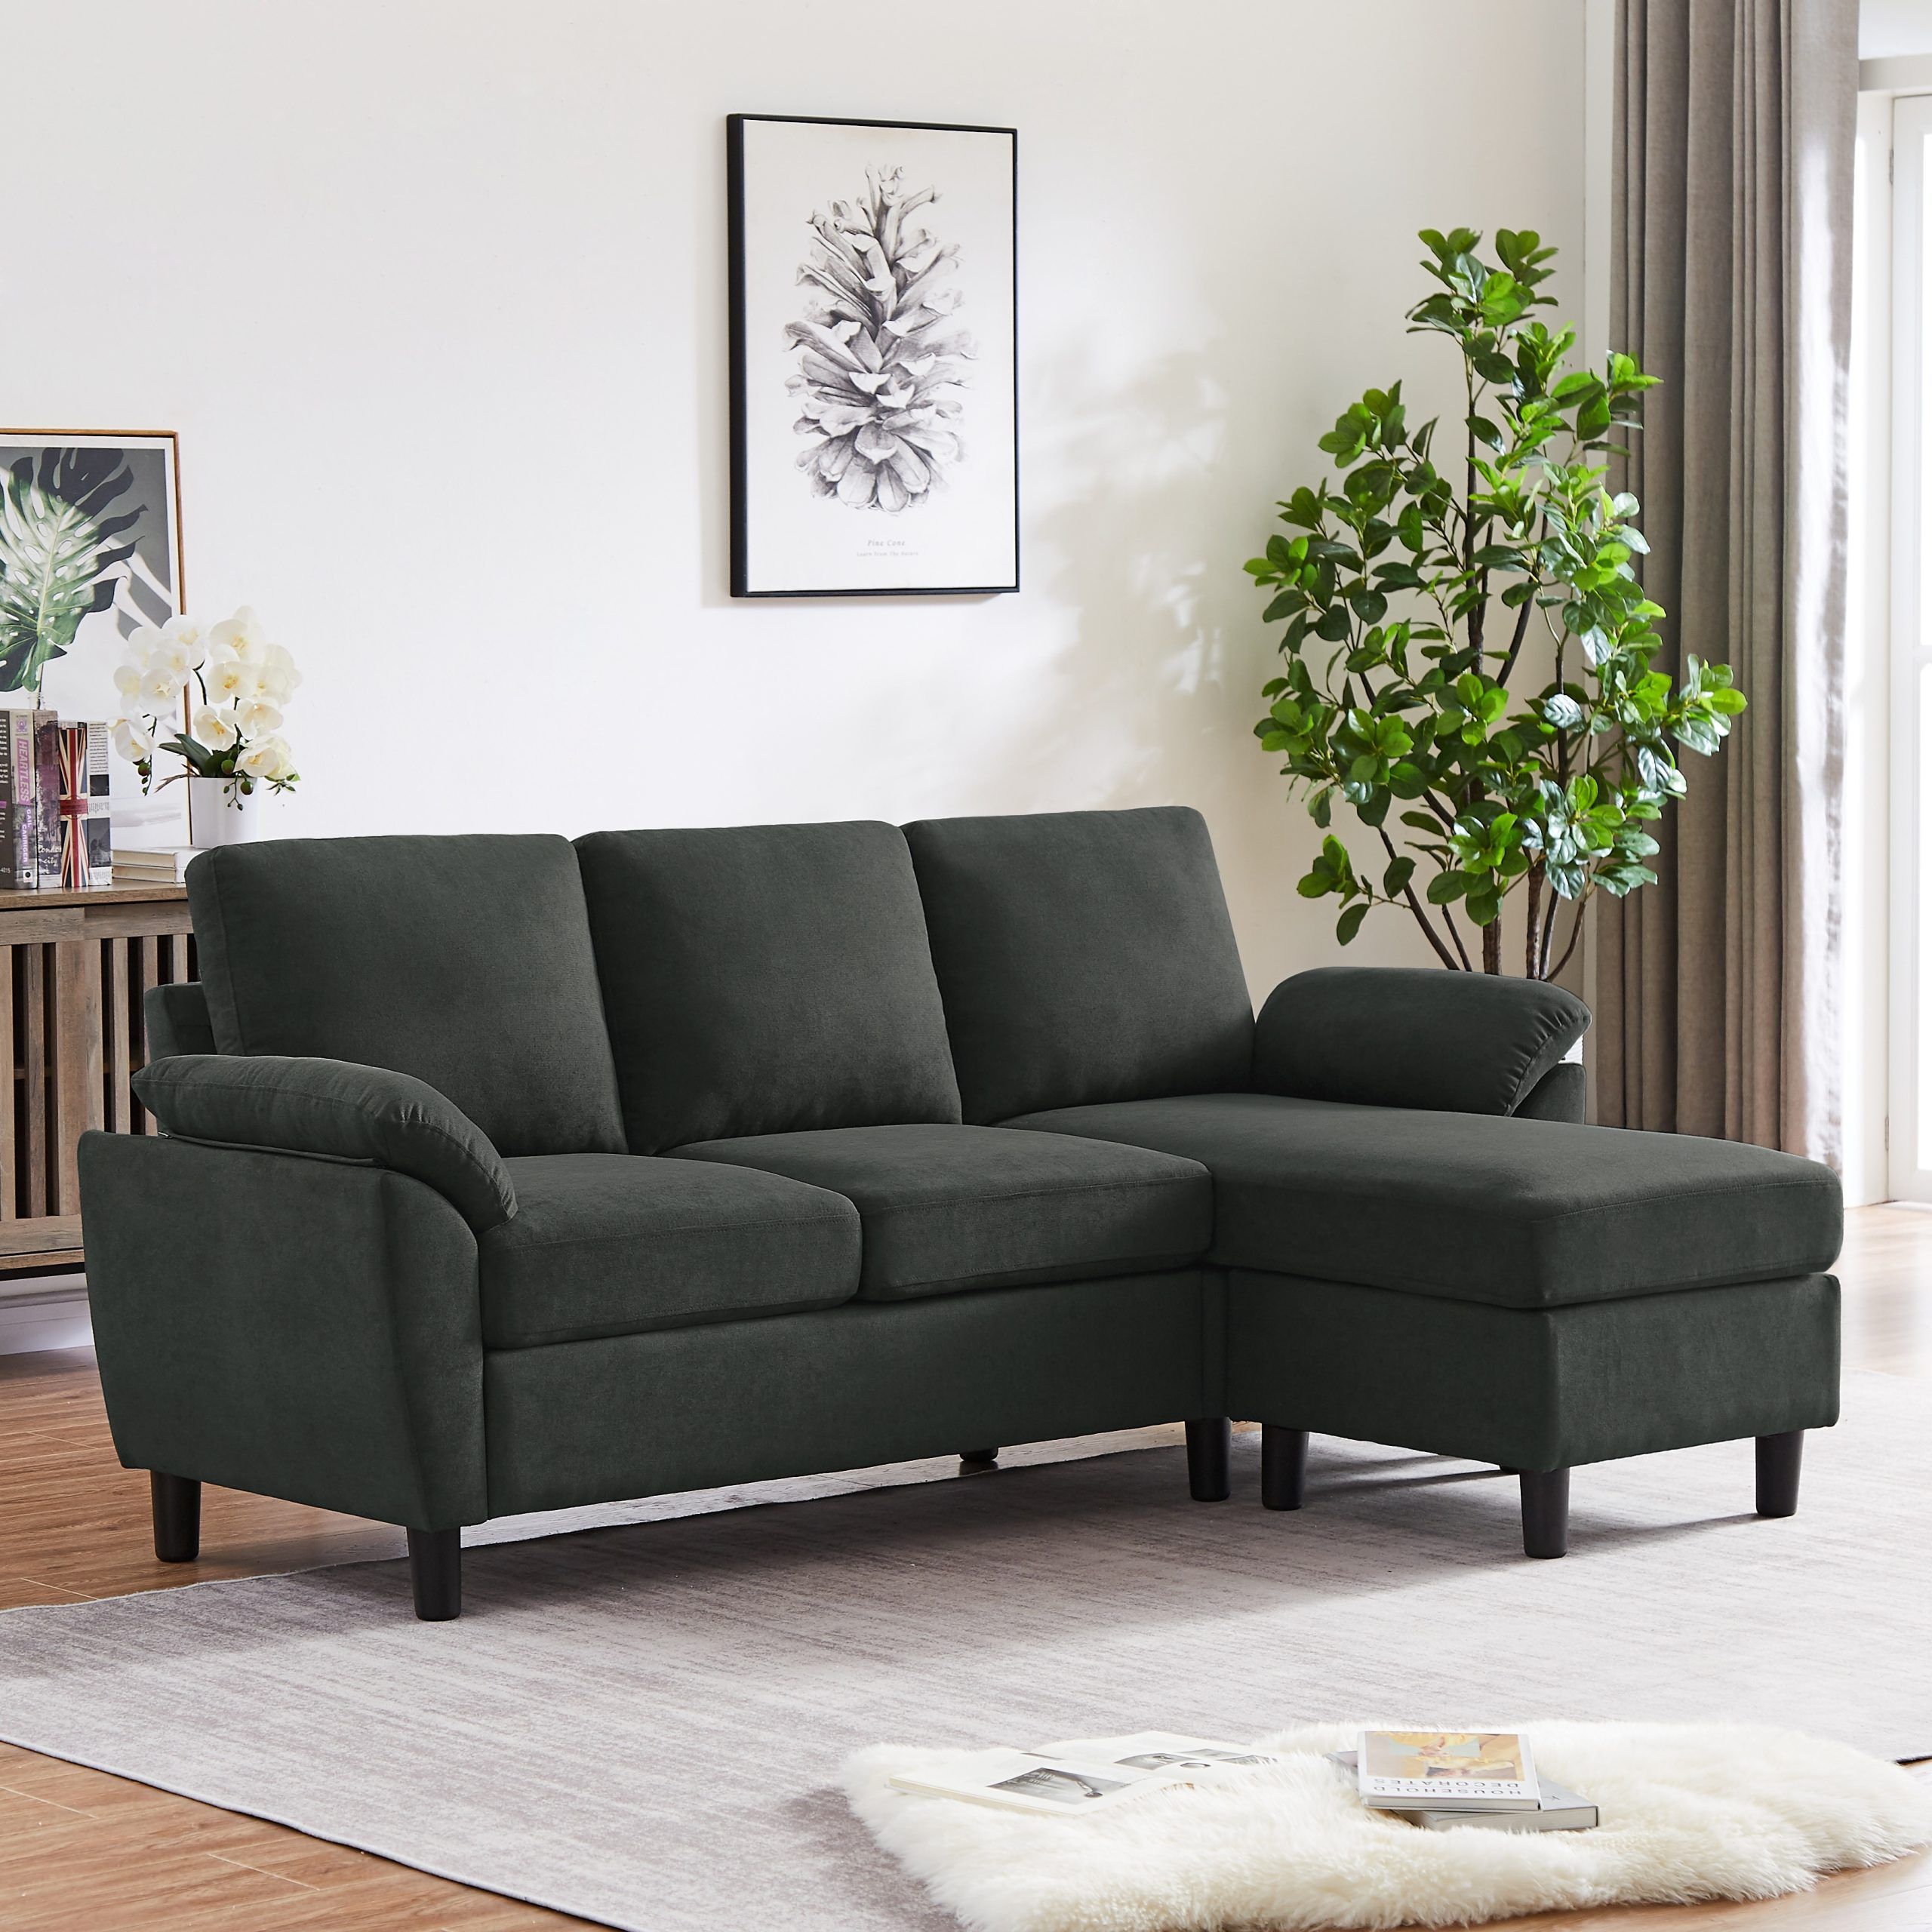 Jarenie Sofa Couch Upholstered L Shape Sectional Sofas Sets For Living Room  – On Sale – Bed Bath & Beyond – 36756391 Inside Small L Shaped Sectional Sofas In Beige (View 5 of 15)